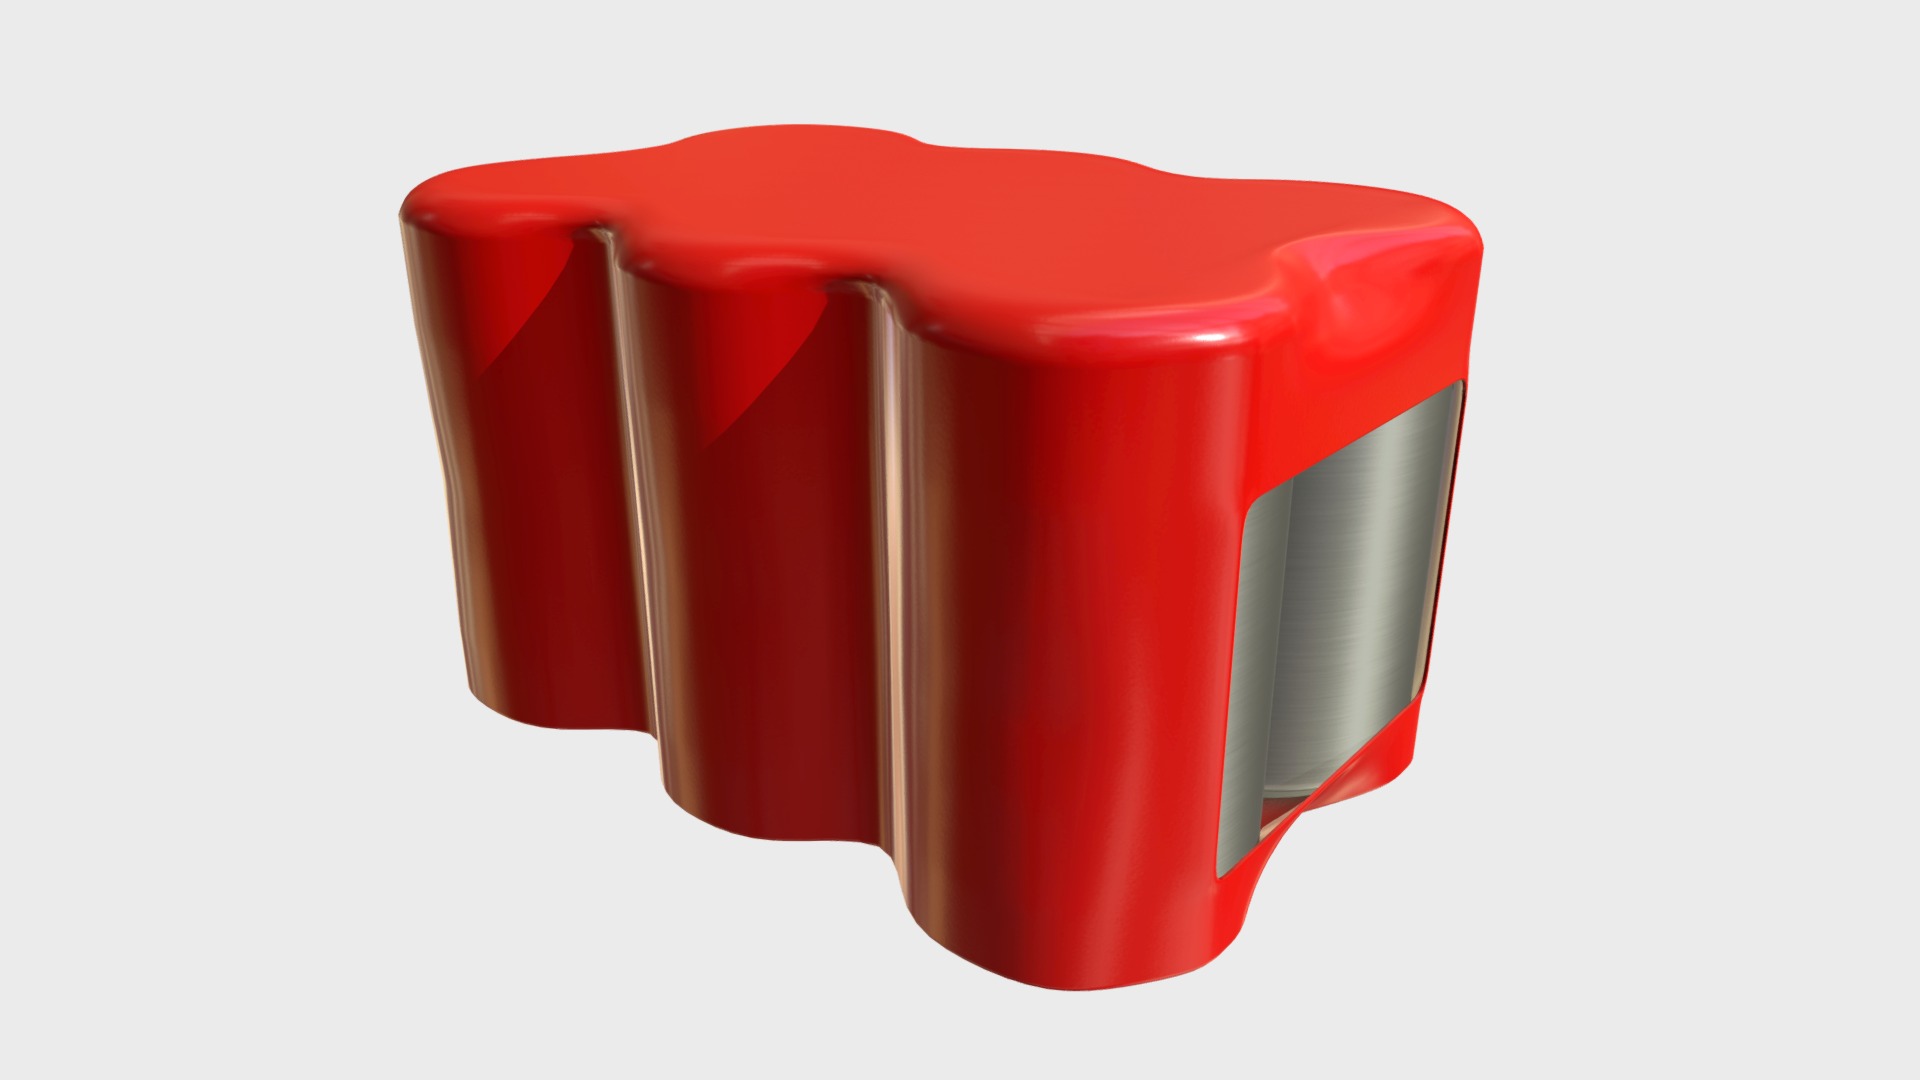 3D model Pack of six soda cans - This is a 3D model of the Pack of six soda cans. The 3D model is about a red plastic cup.